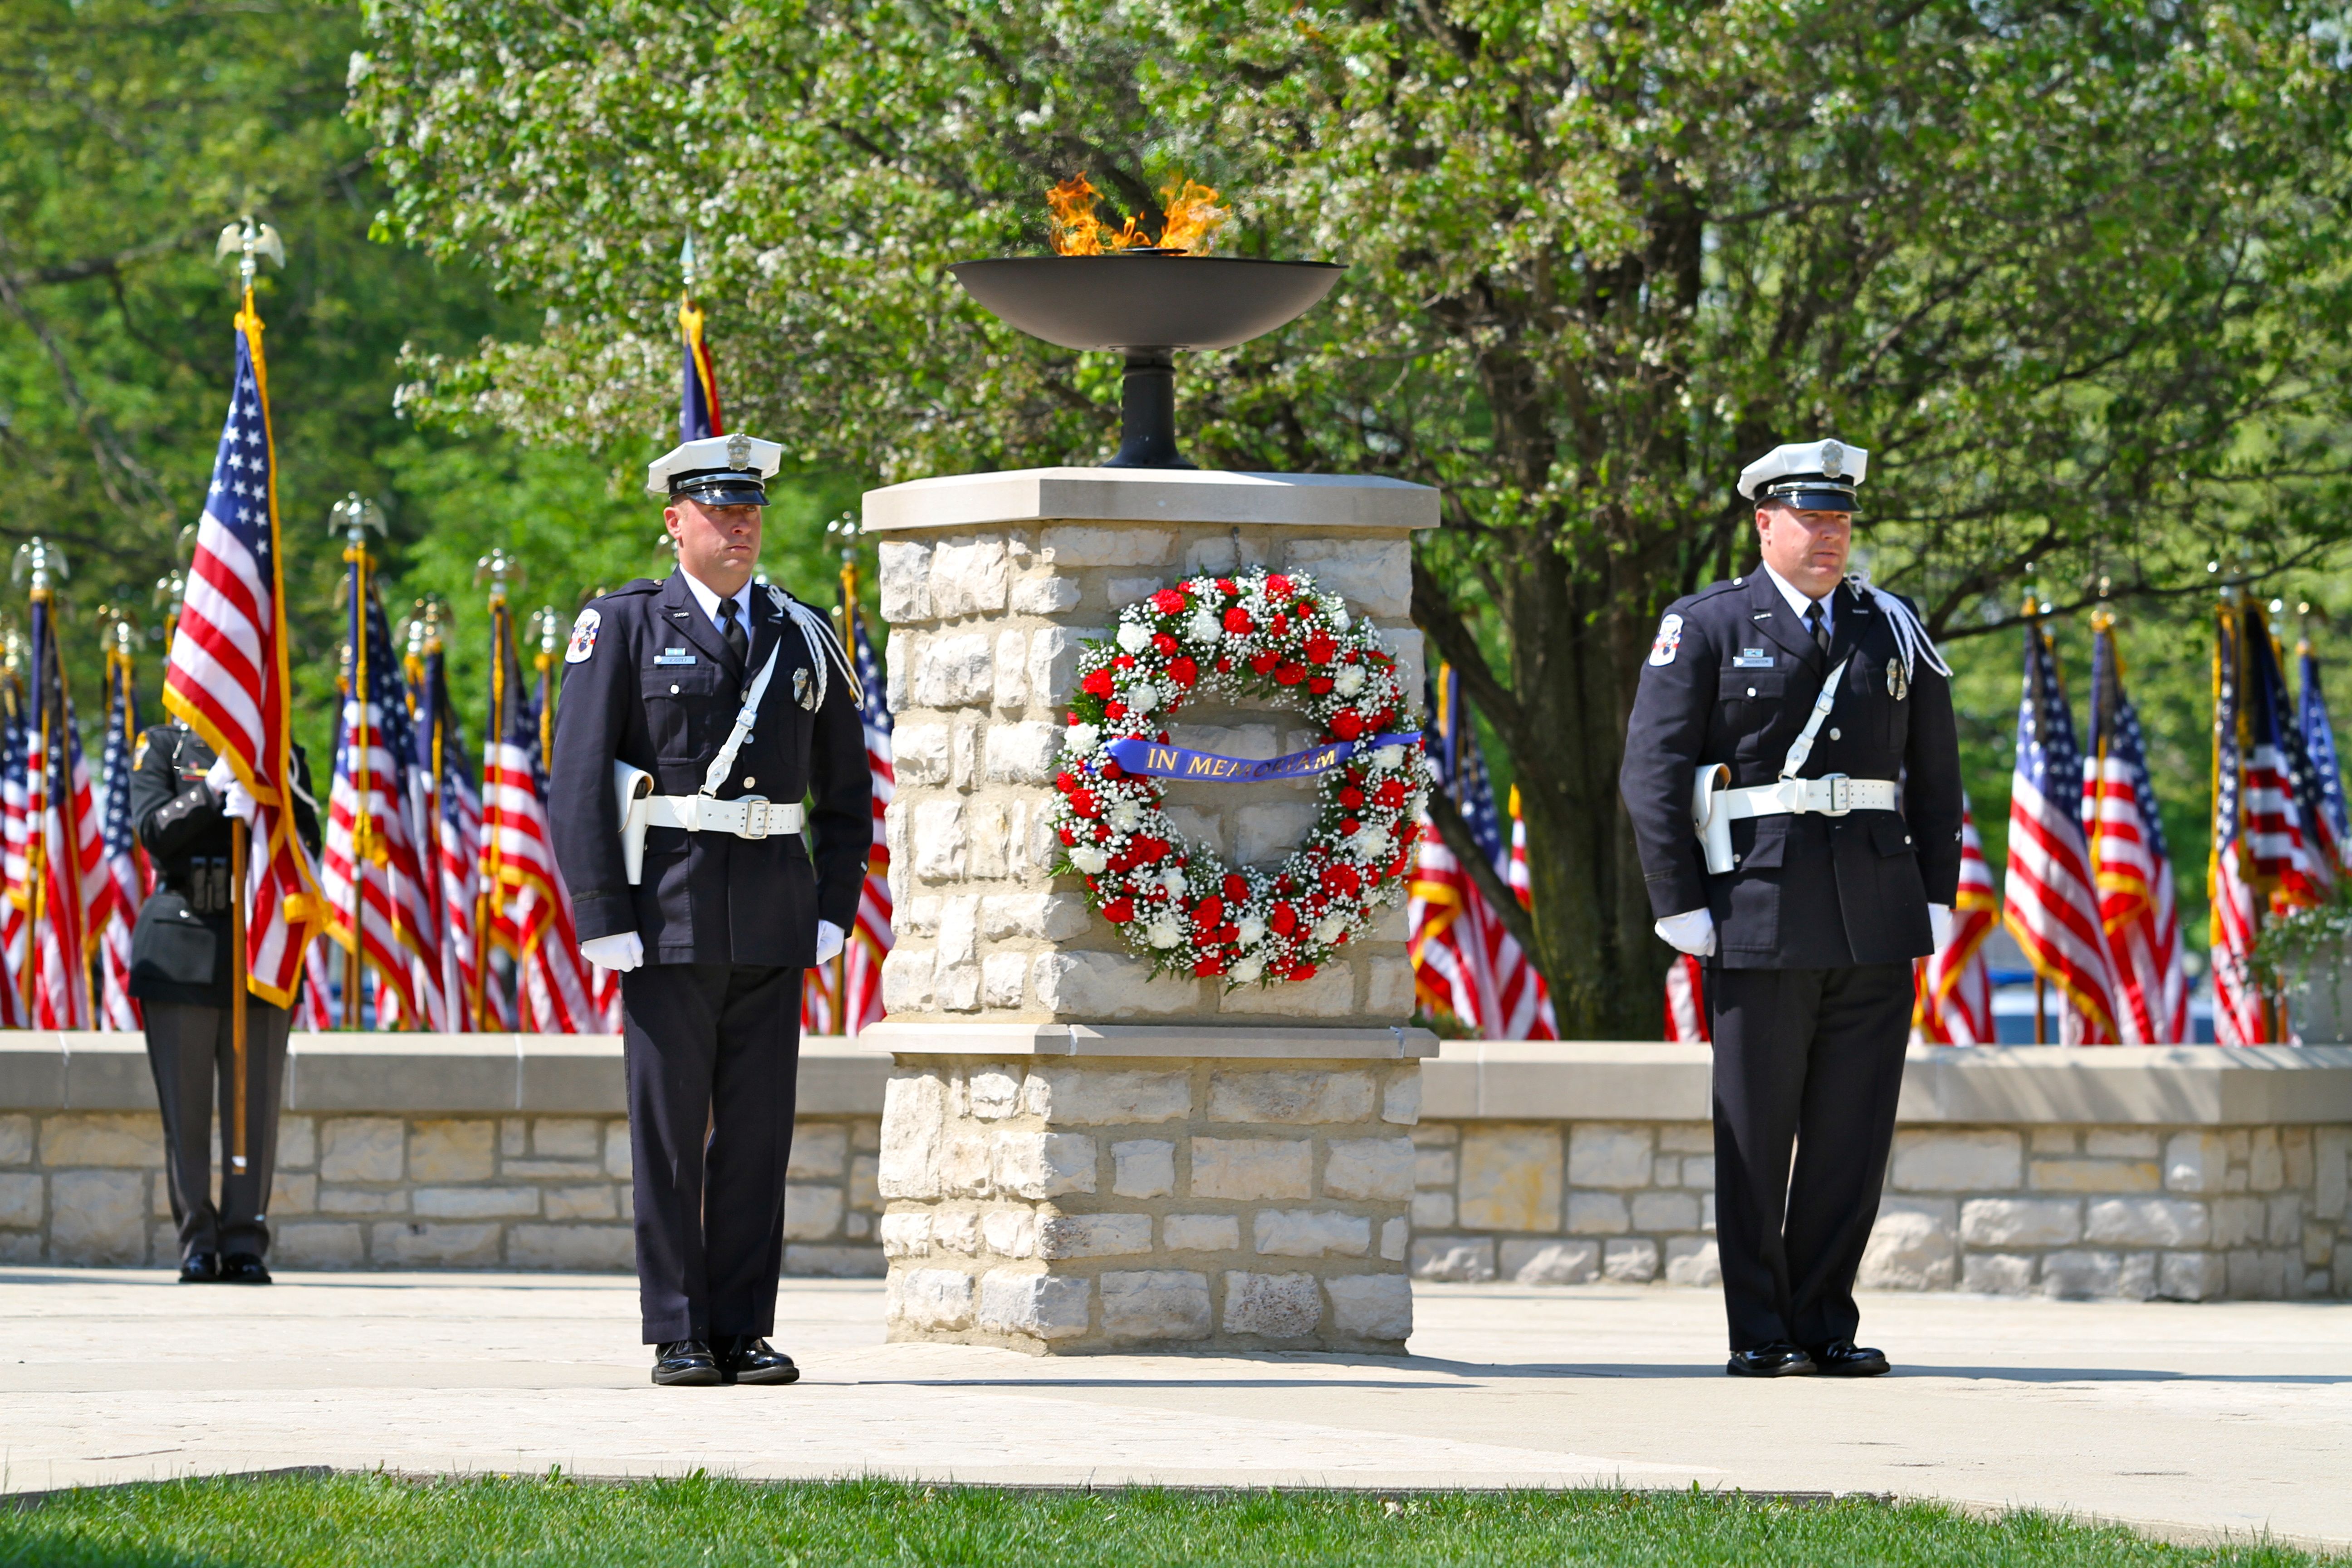 Ohio Attorney General DeWine, Ohio Law Enforcement Officers Honor 766 Killed in the Line of Duty